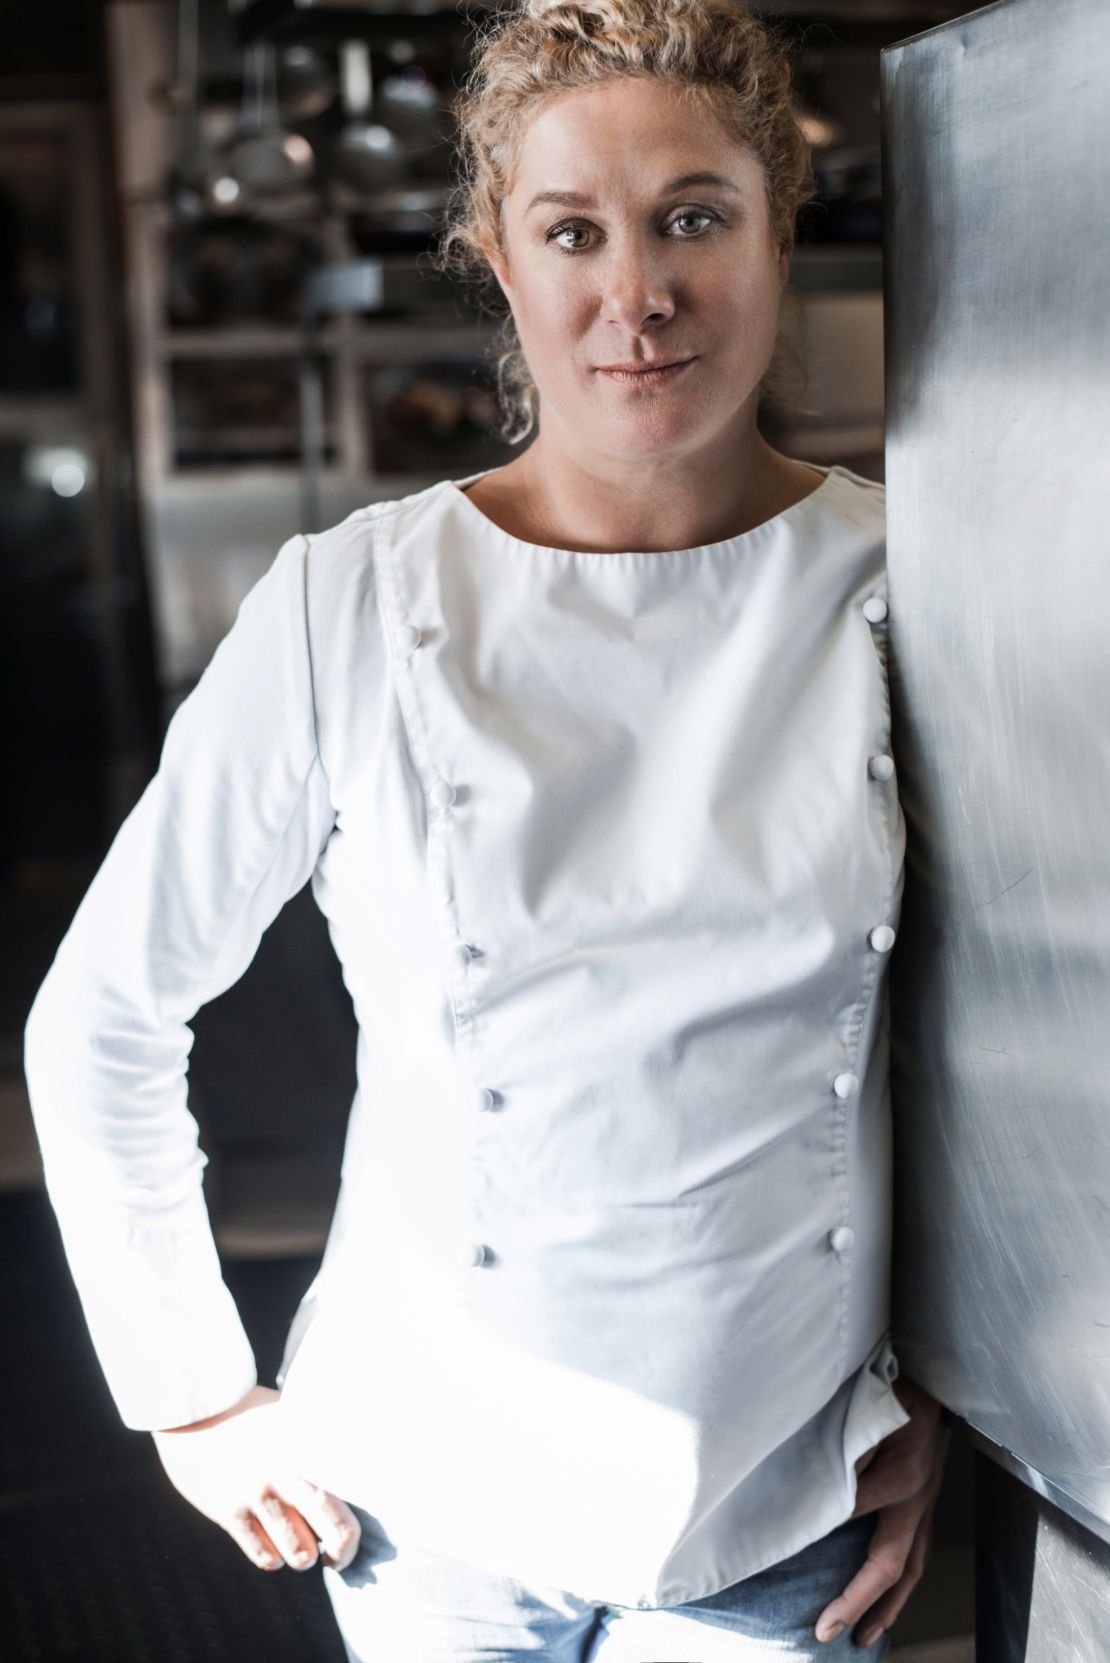 Slovenian chef Ana Ros was named World's Best Female Chef 2017 by World's 50 Best Restaurants.